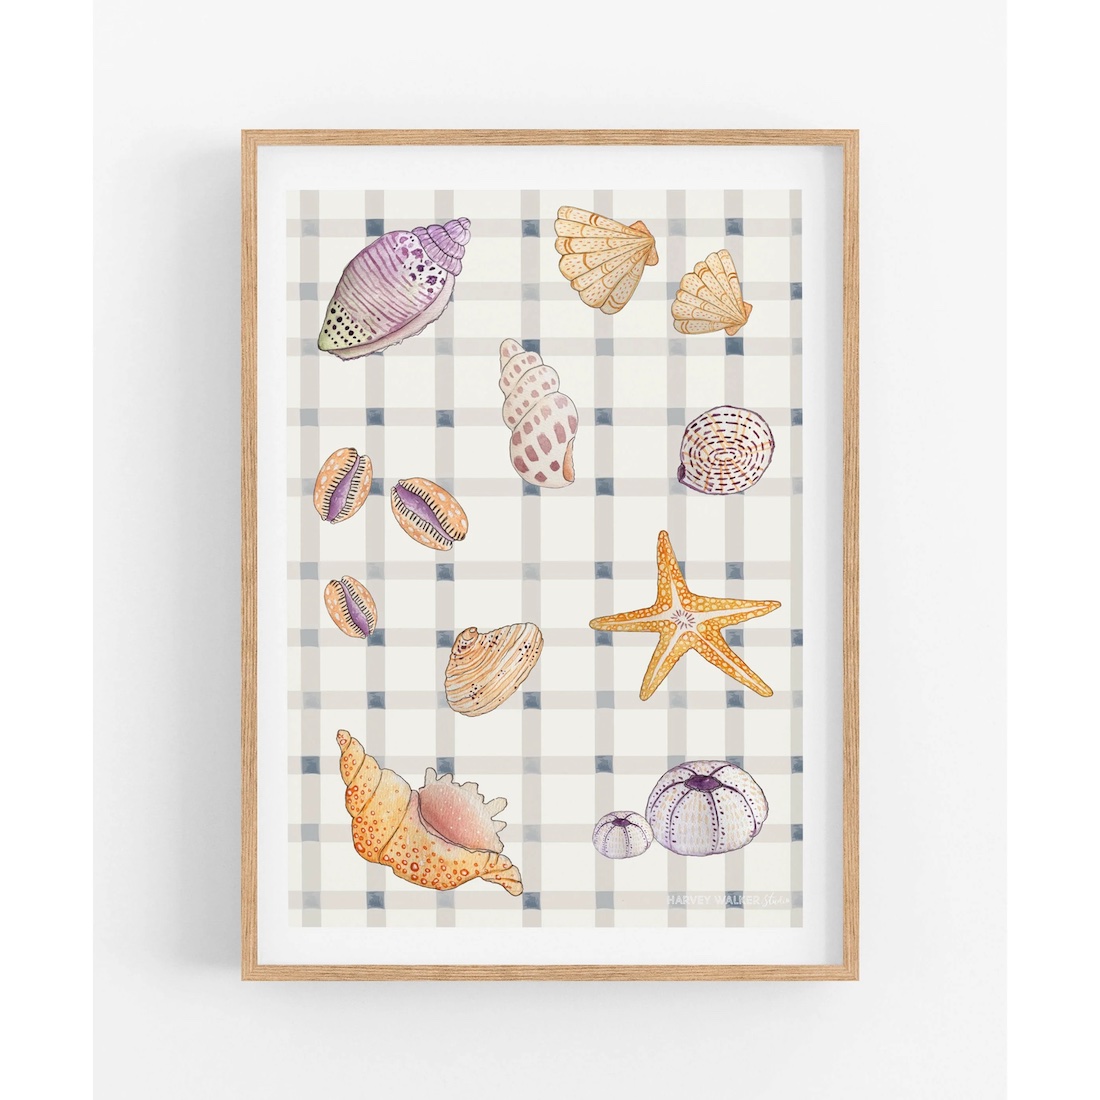 Seashell collection artwork on gingham background